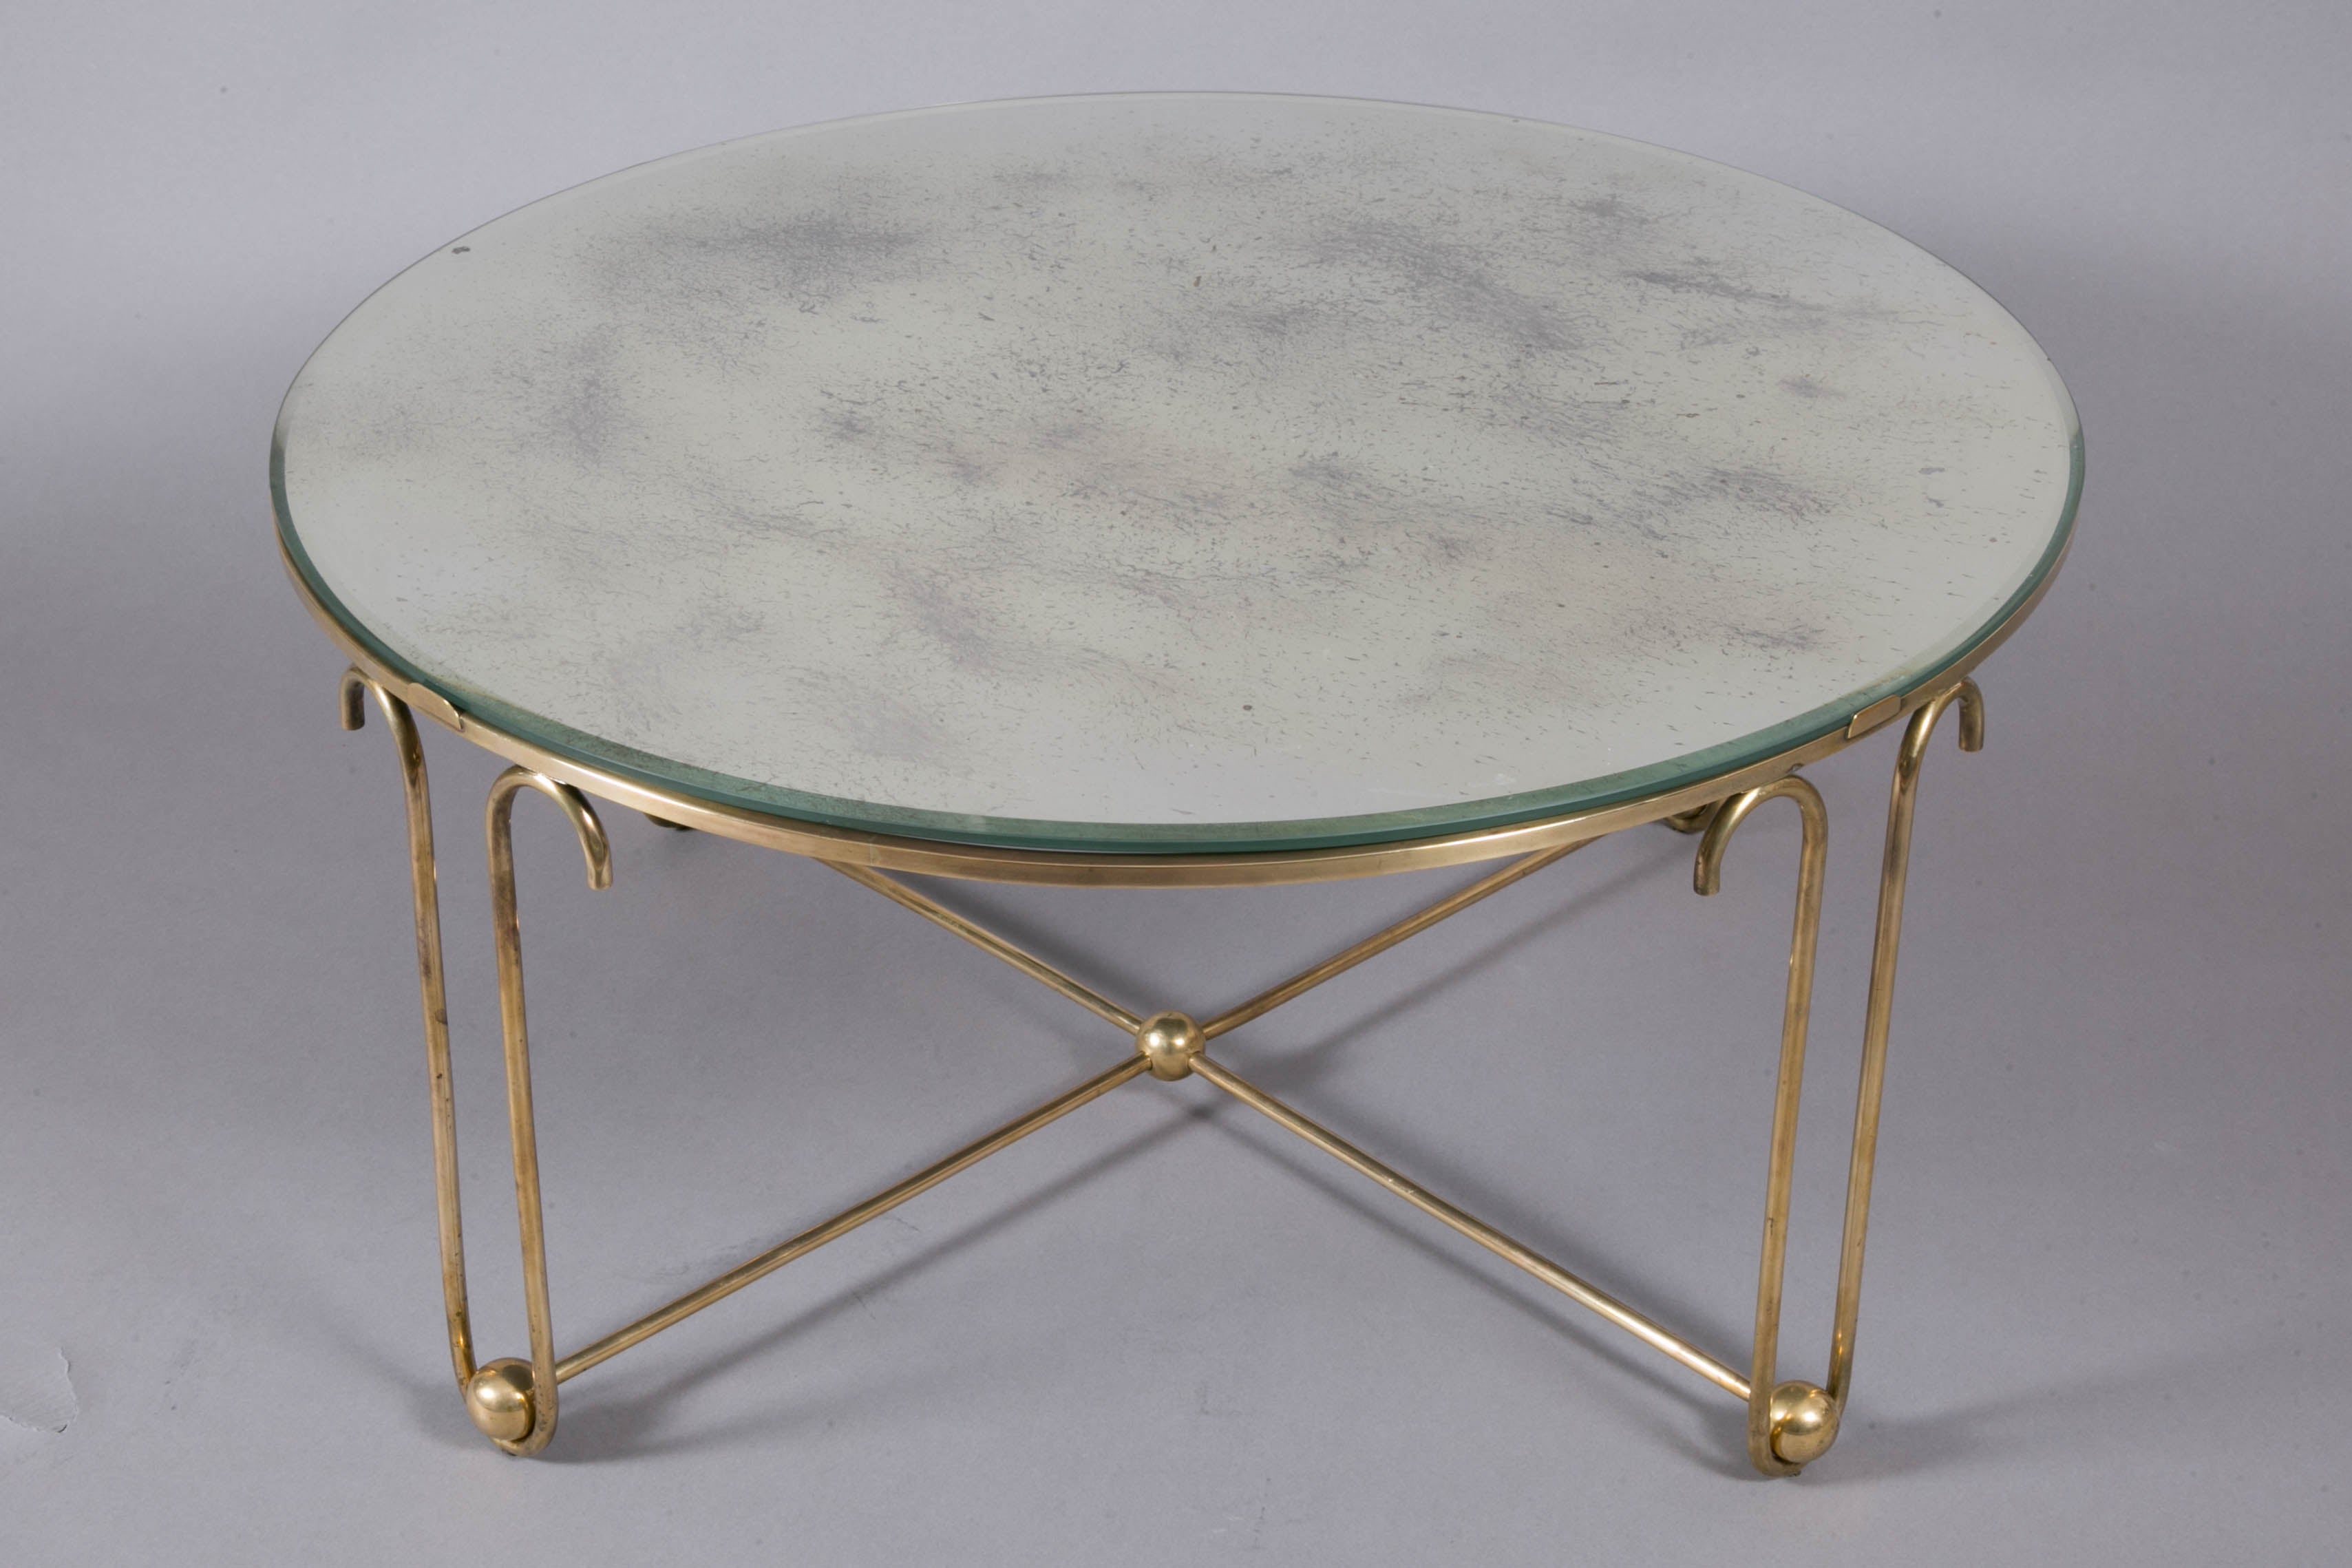 Mid-20th Century Brass Coffee Table with Nesting Tables by Jean Royère, 1950s